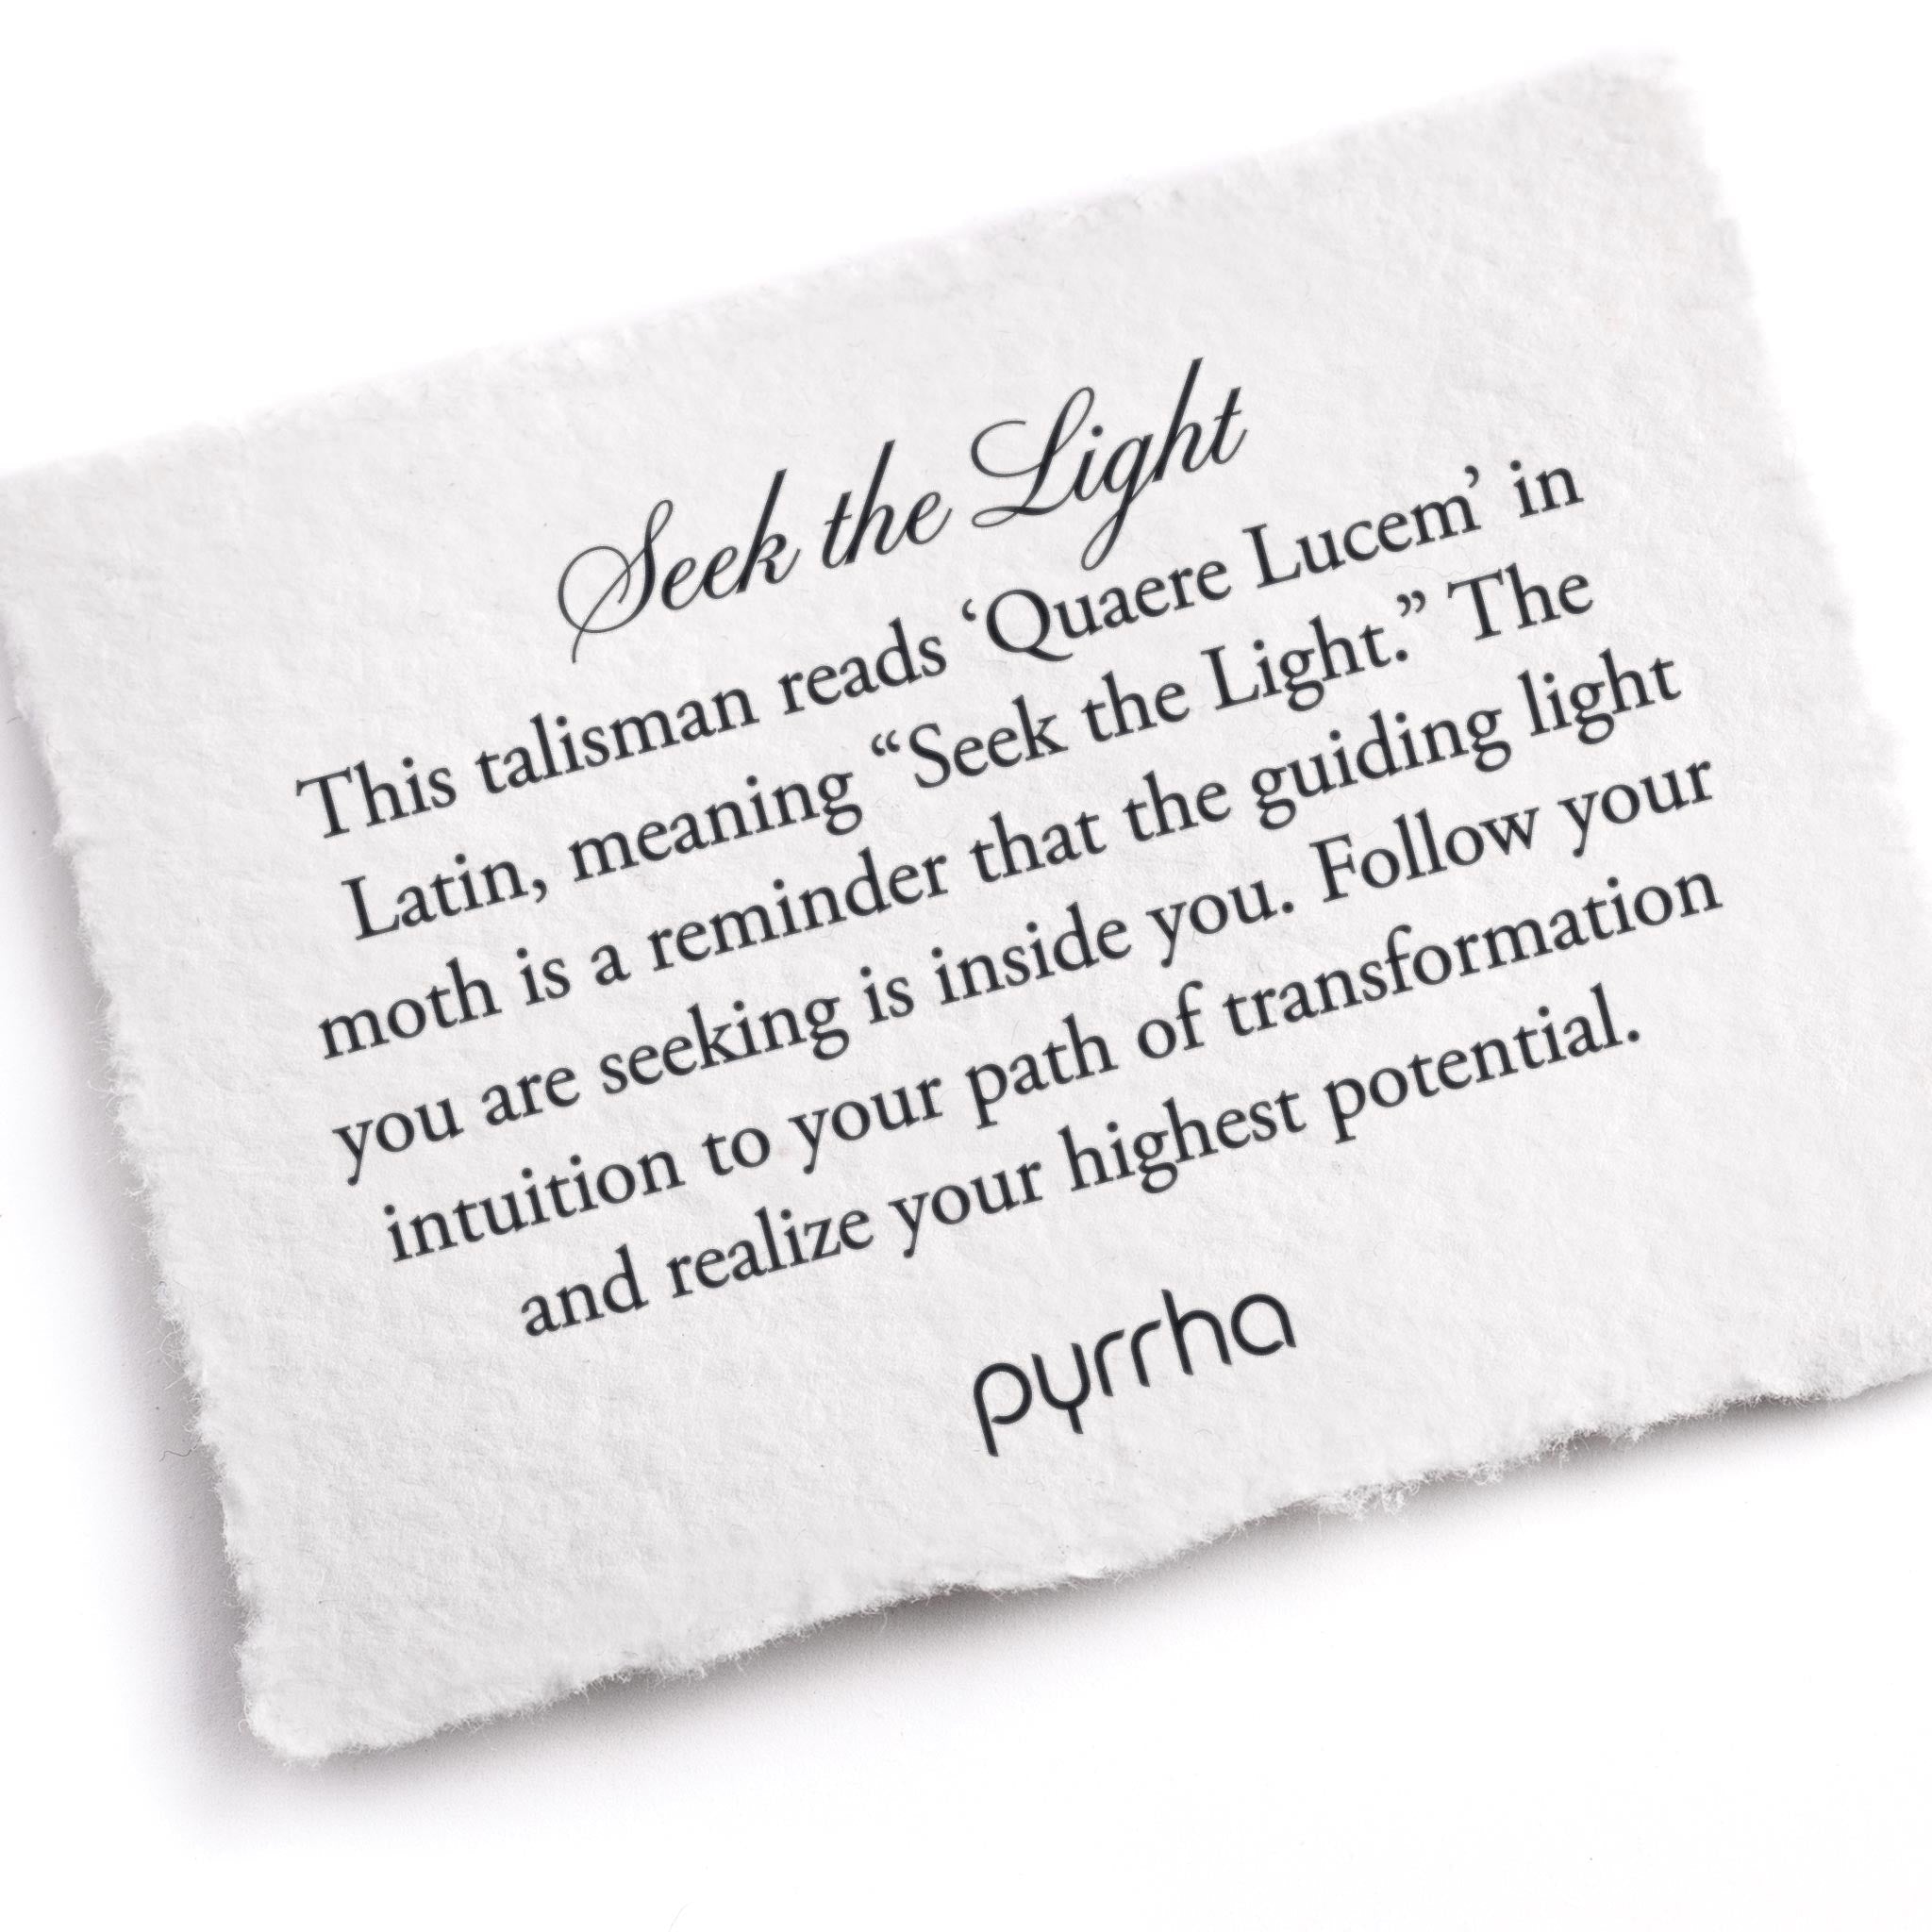 A hand-torn, letterpress printed card describing the meaning for Pyrrha's Seek The Light Signature Talisman Necklace